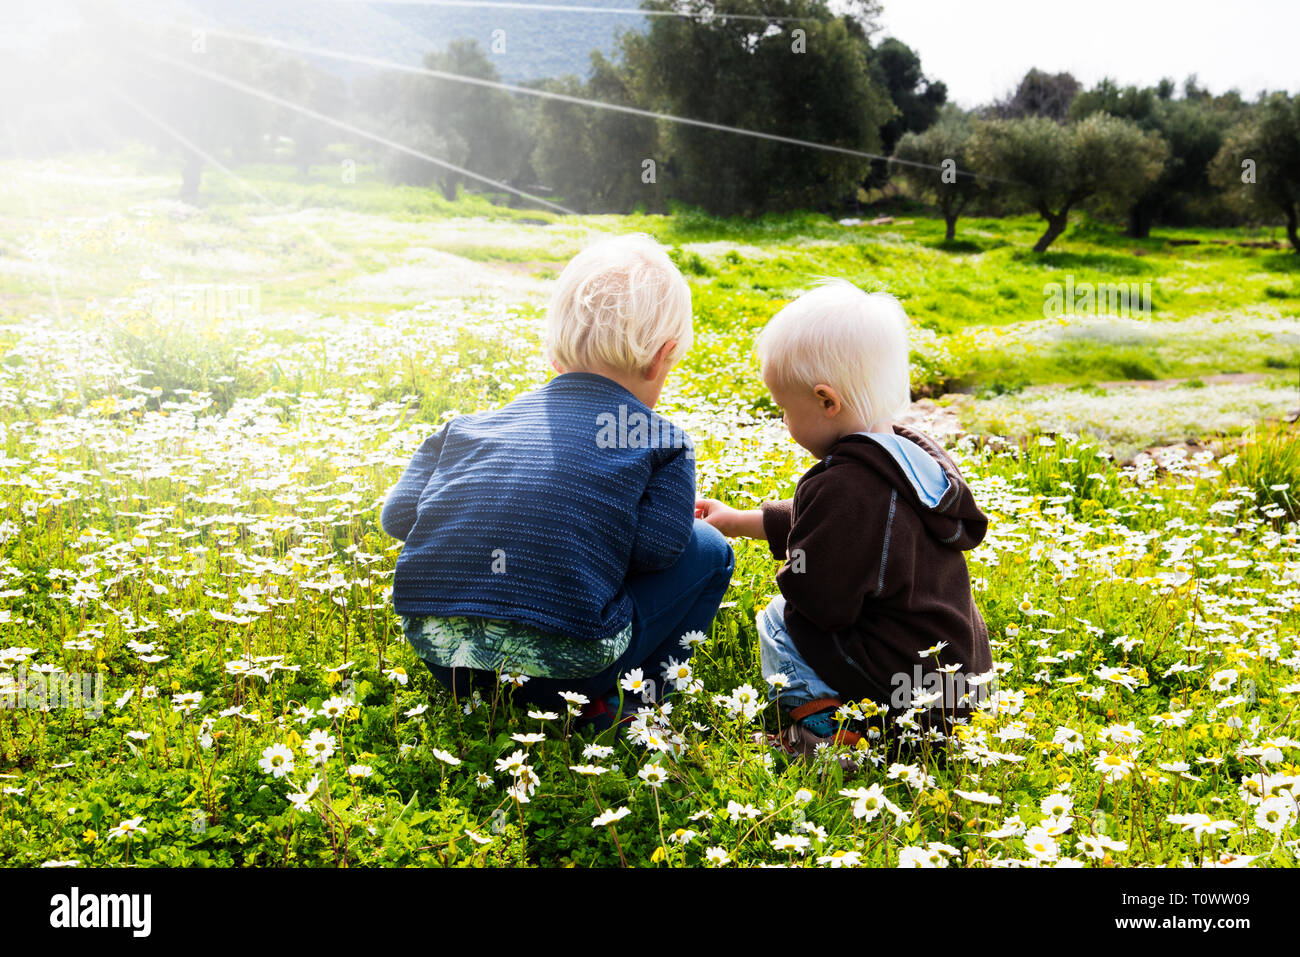 Two Blonde Kids Sitting In A Daisy Flower Meadow And Playing Together. Sunny Beautiful Scenery Stock Photo